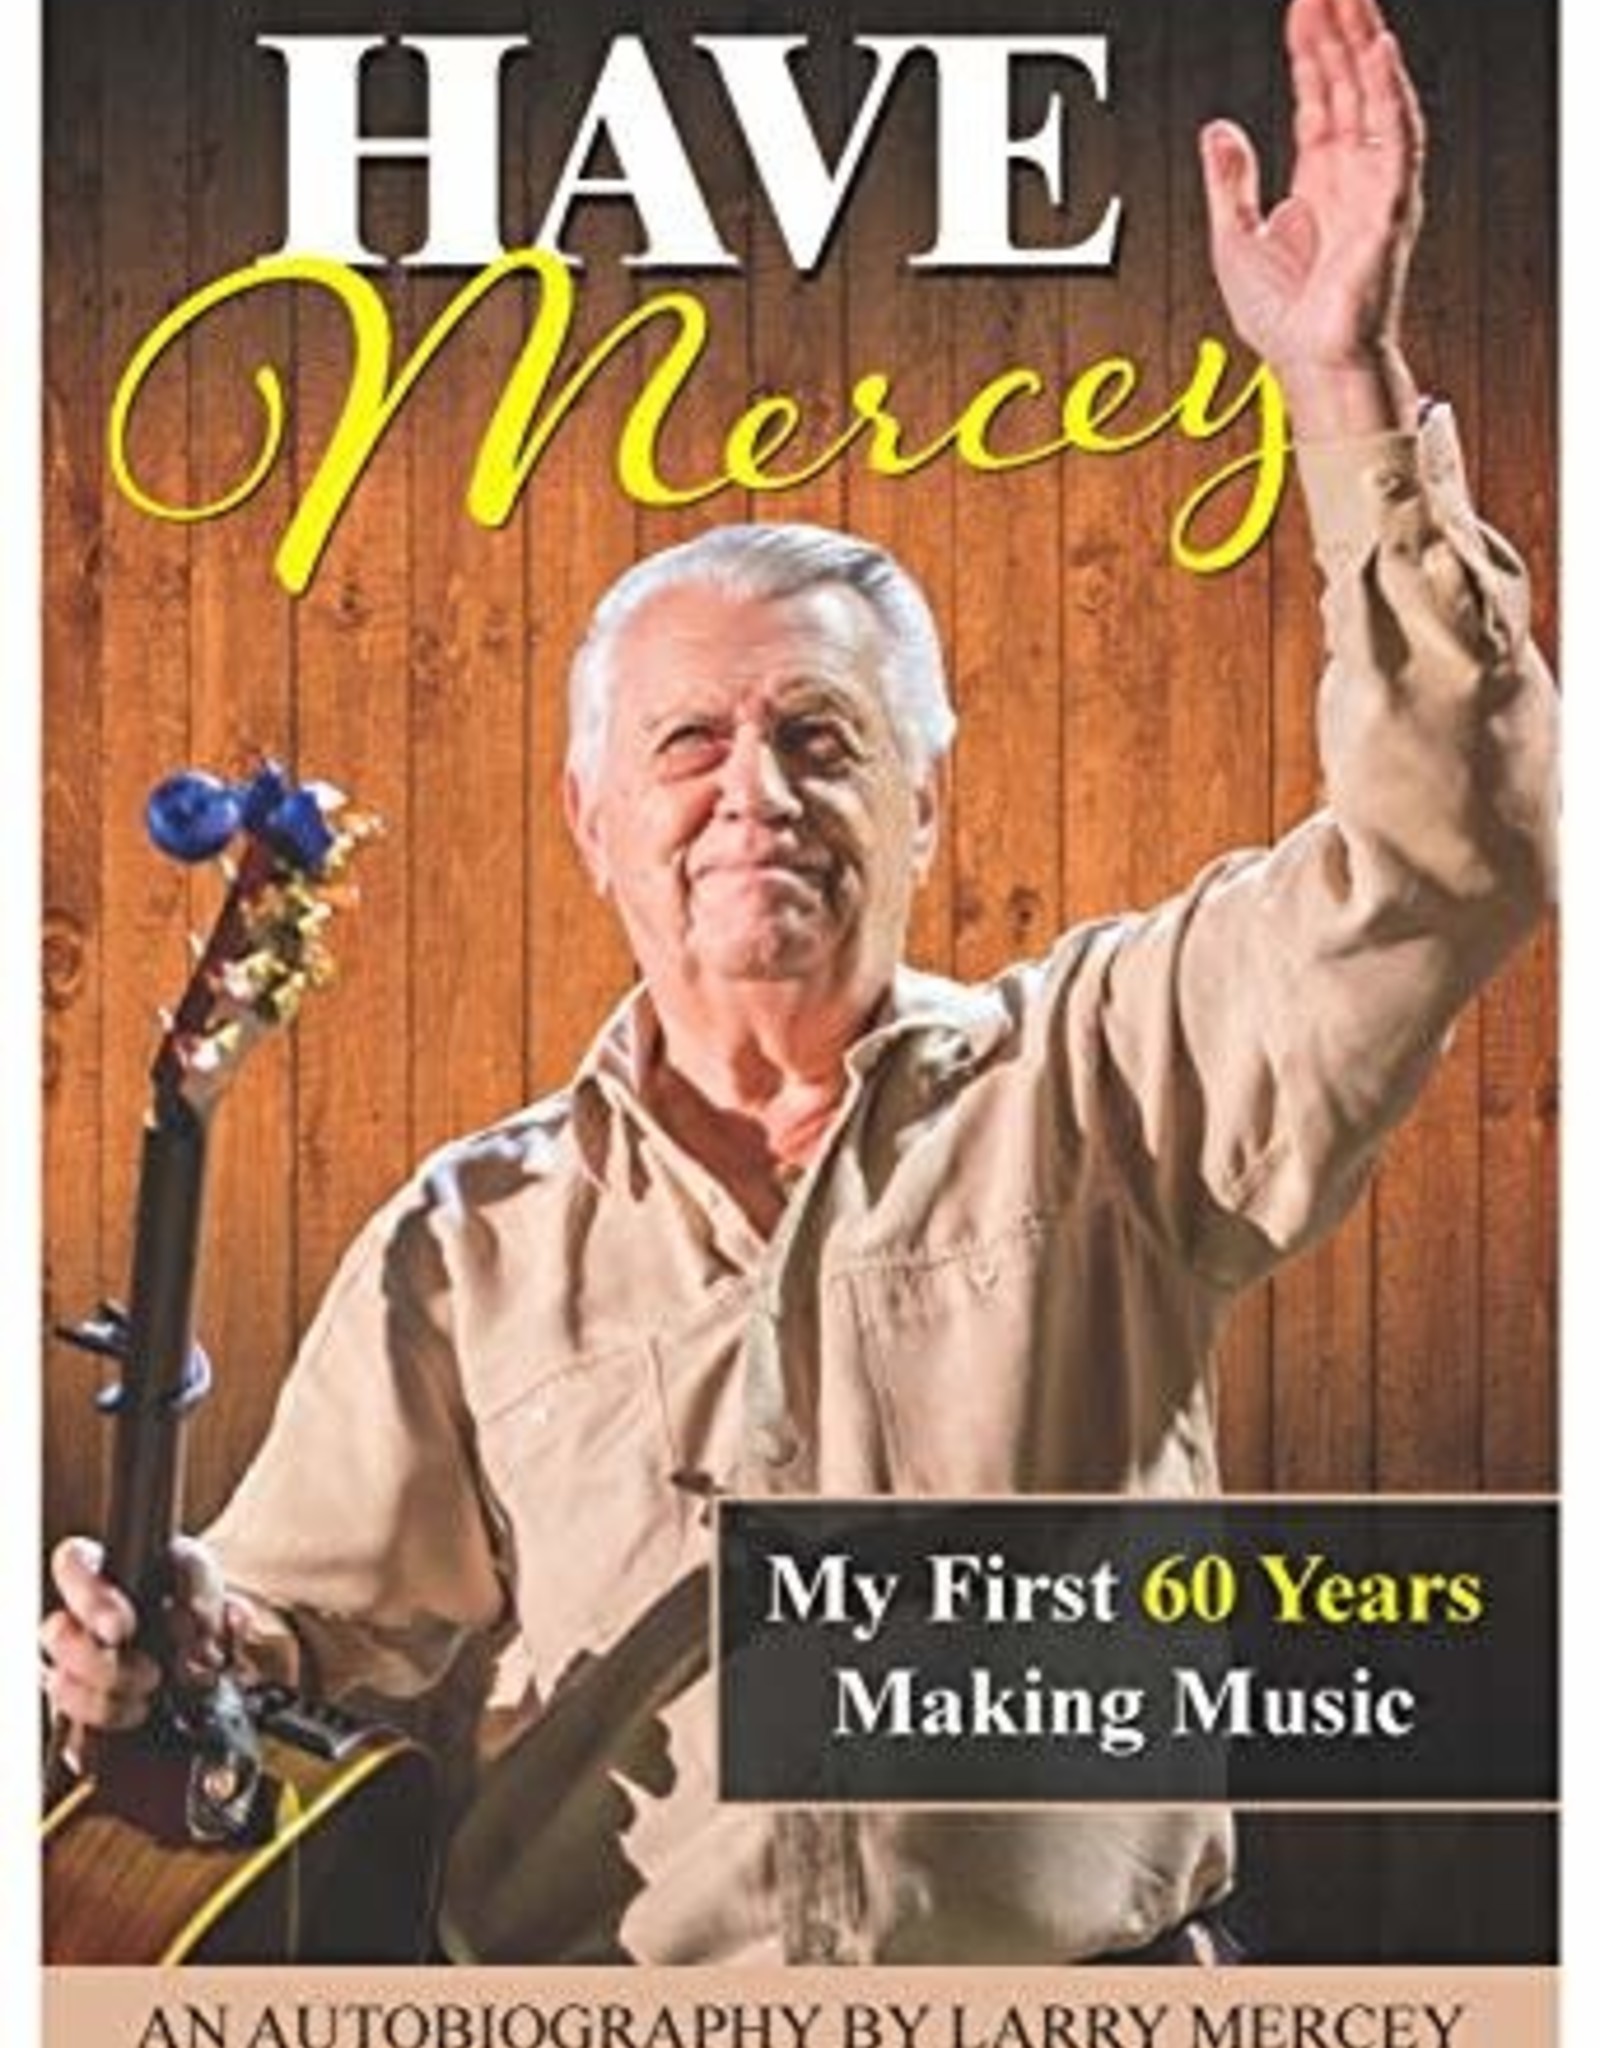 Larry Mercey's autobiography, "Have Mercey"